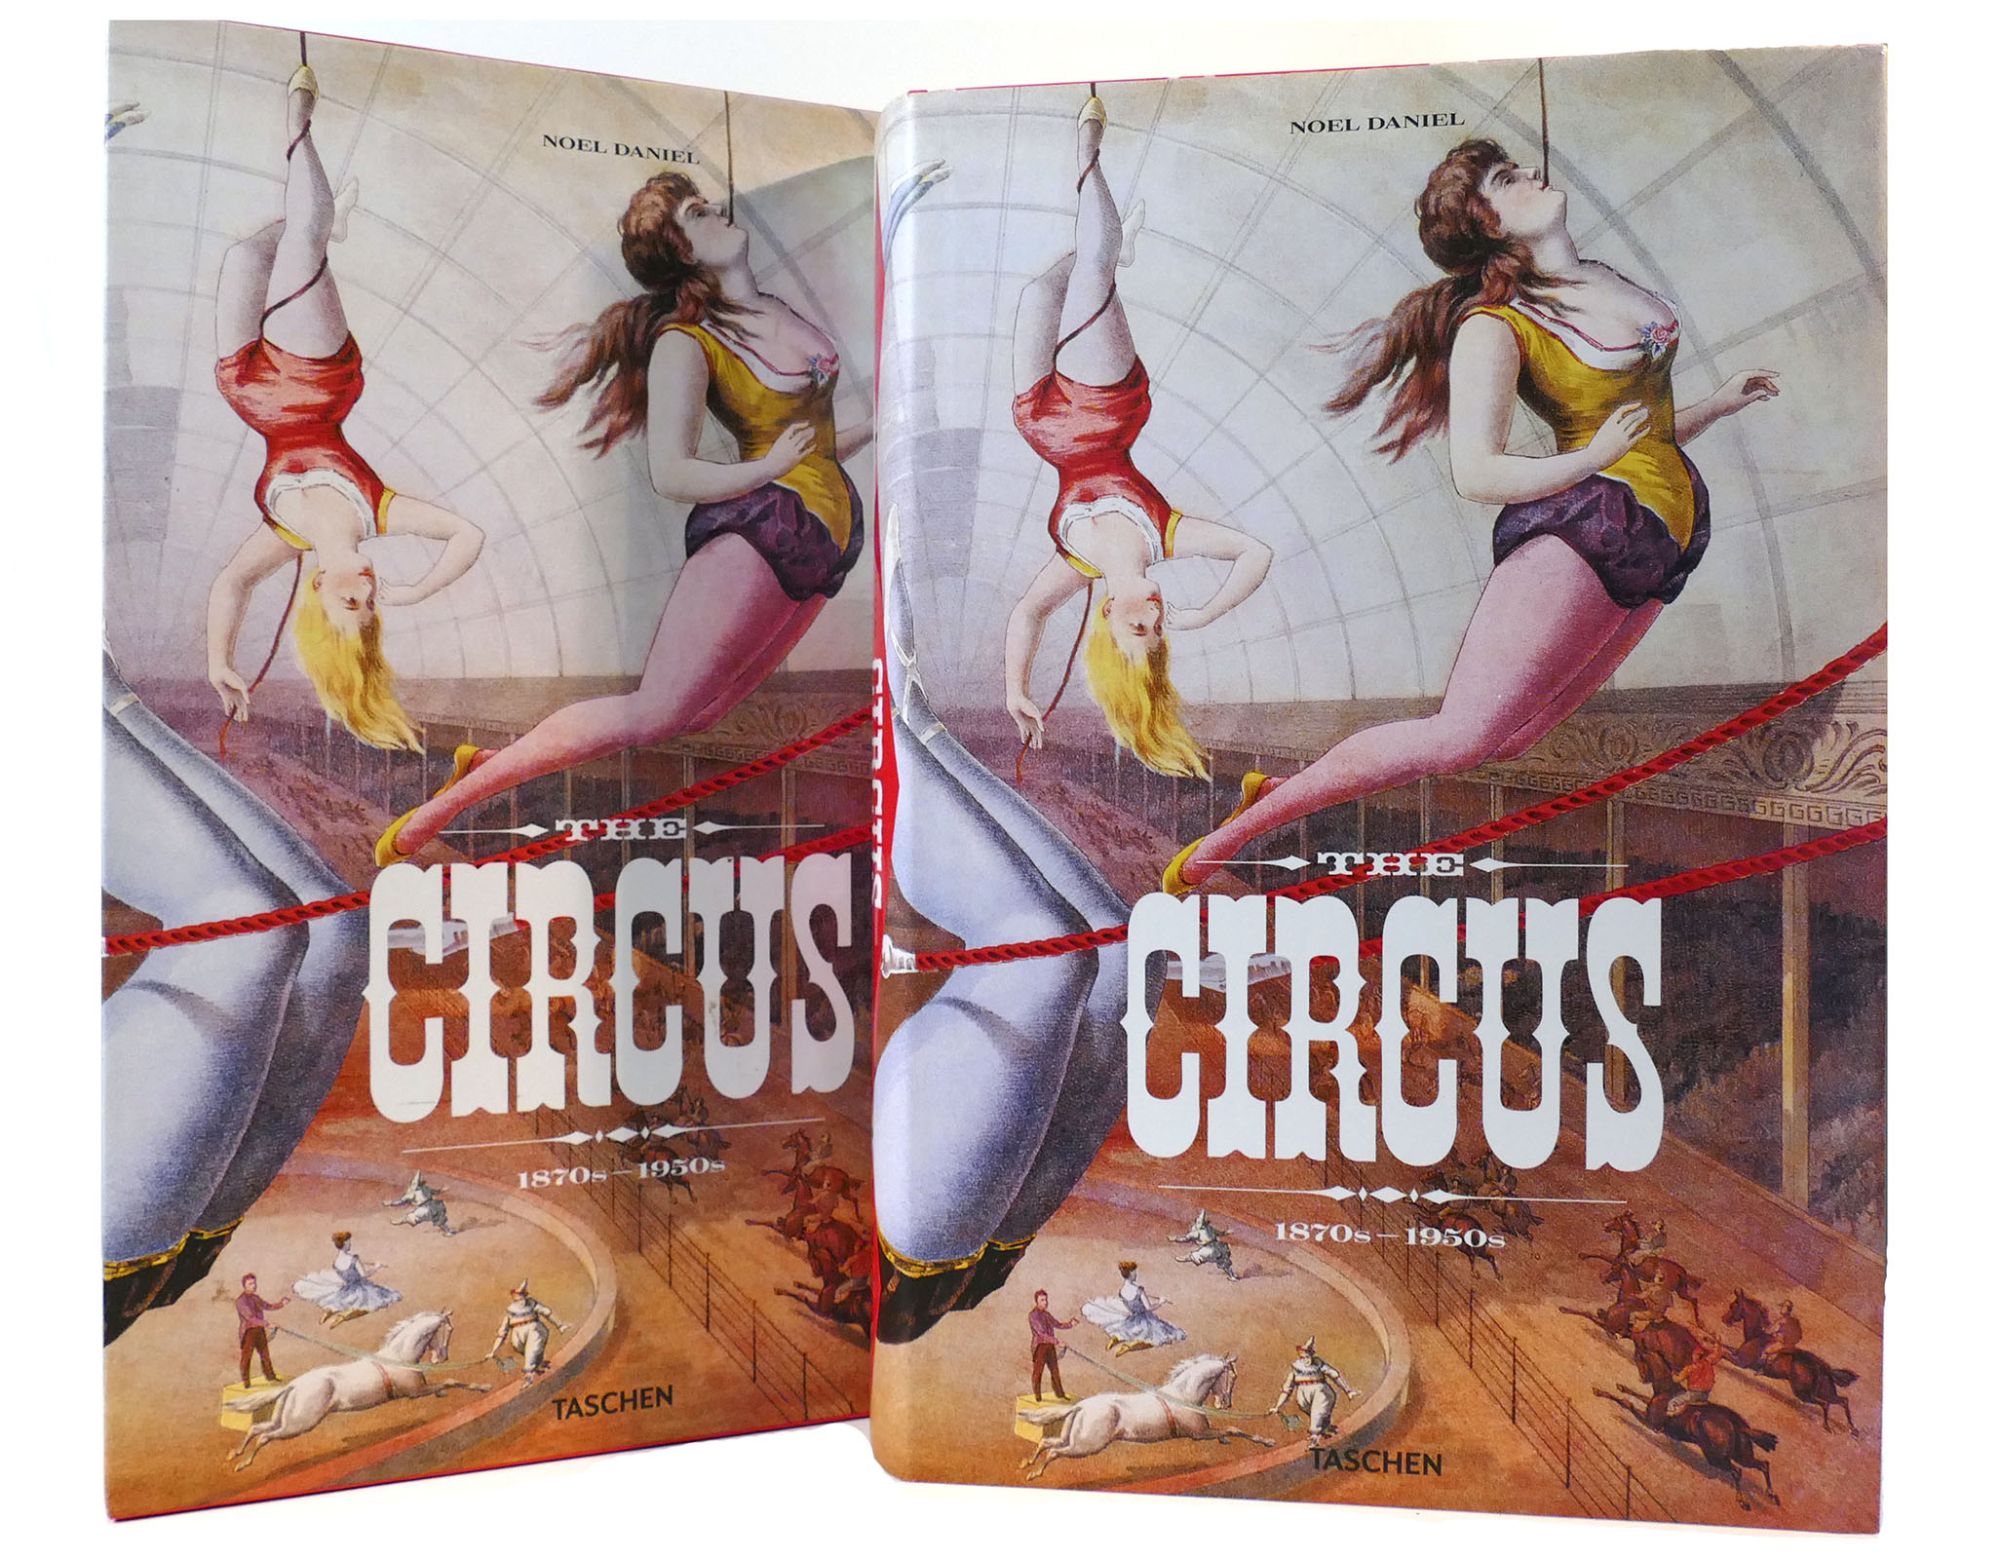 THE CIRCUS 1870'S- 1950'S by Noel Daniel on Rare Book Cellar